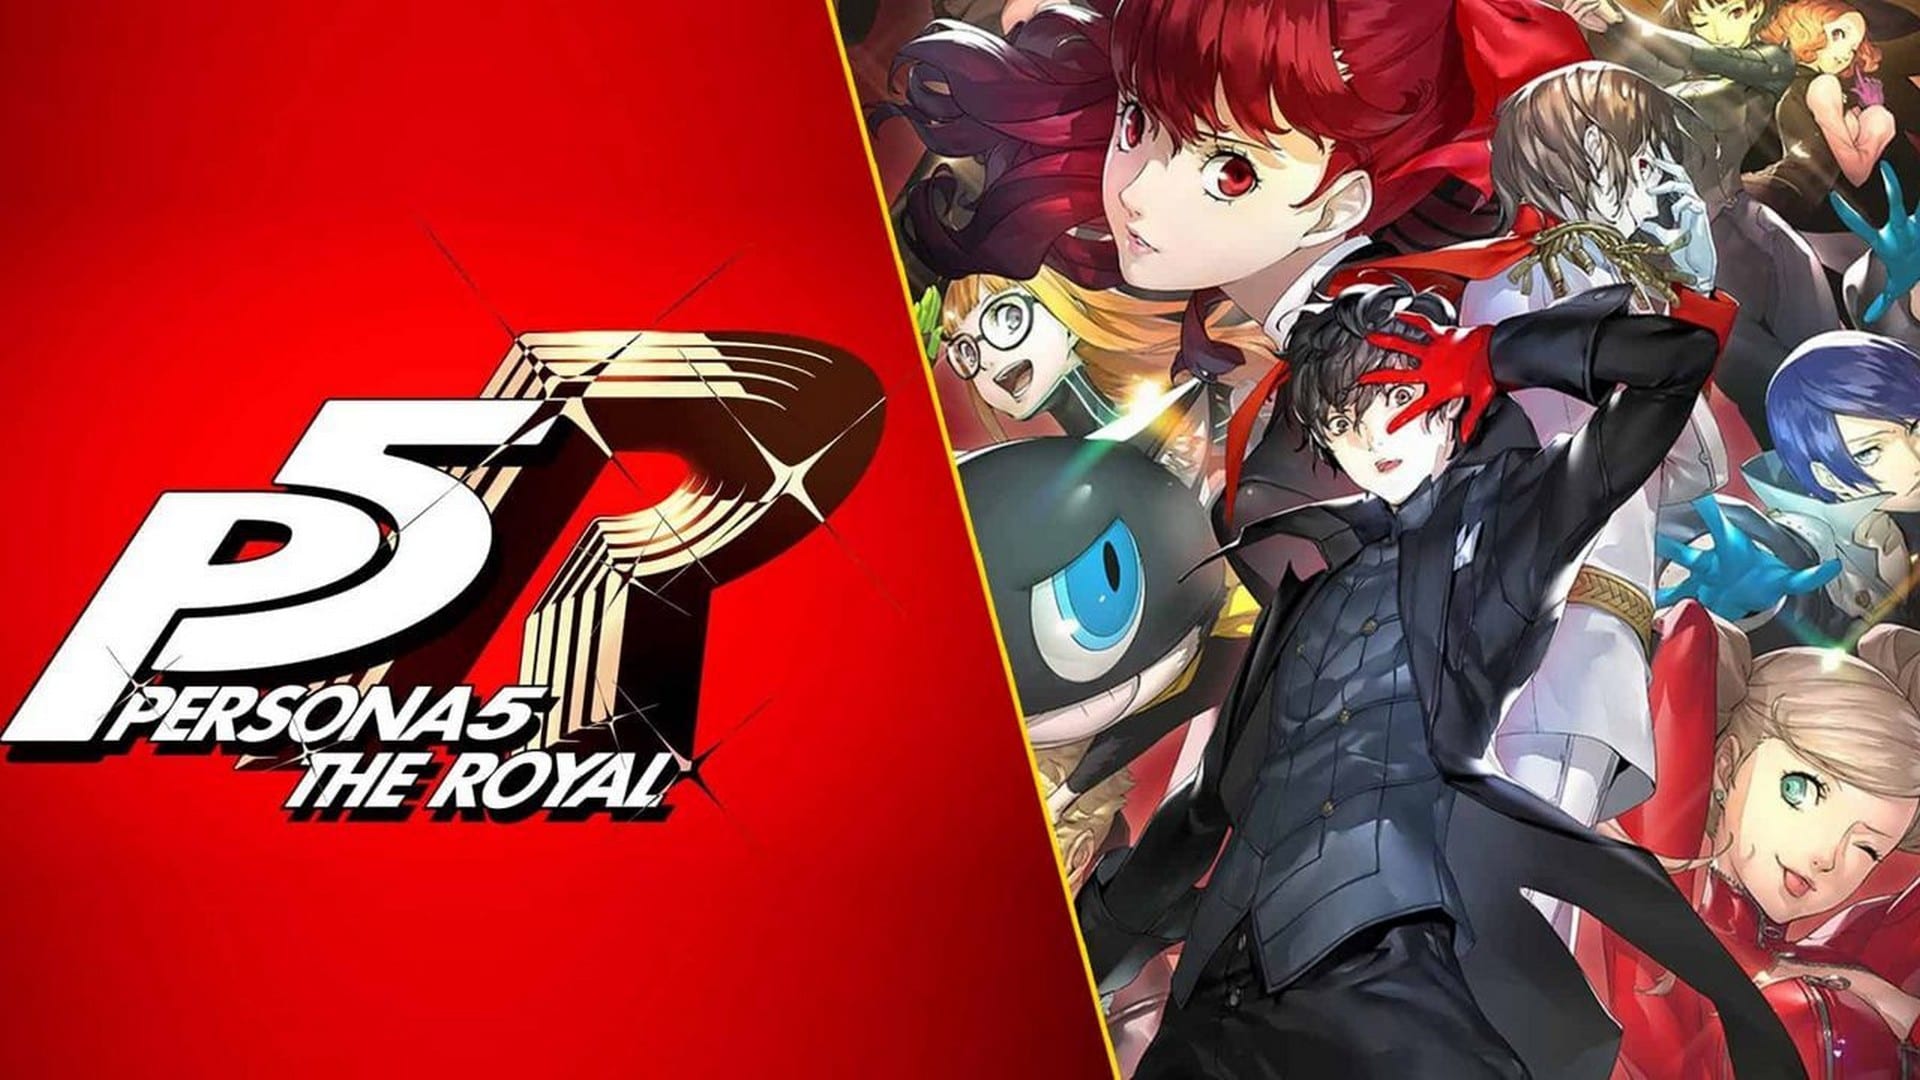 Persona 5 Royal Is Available Now On Xbox Series X and Xbox One